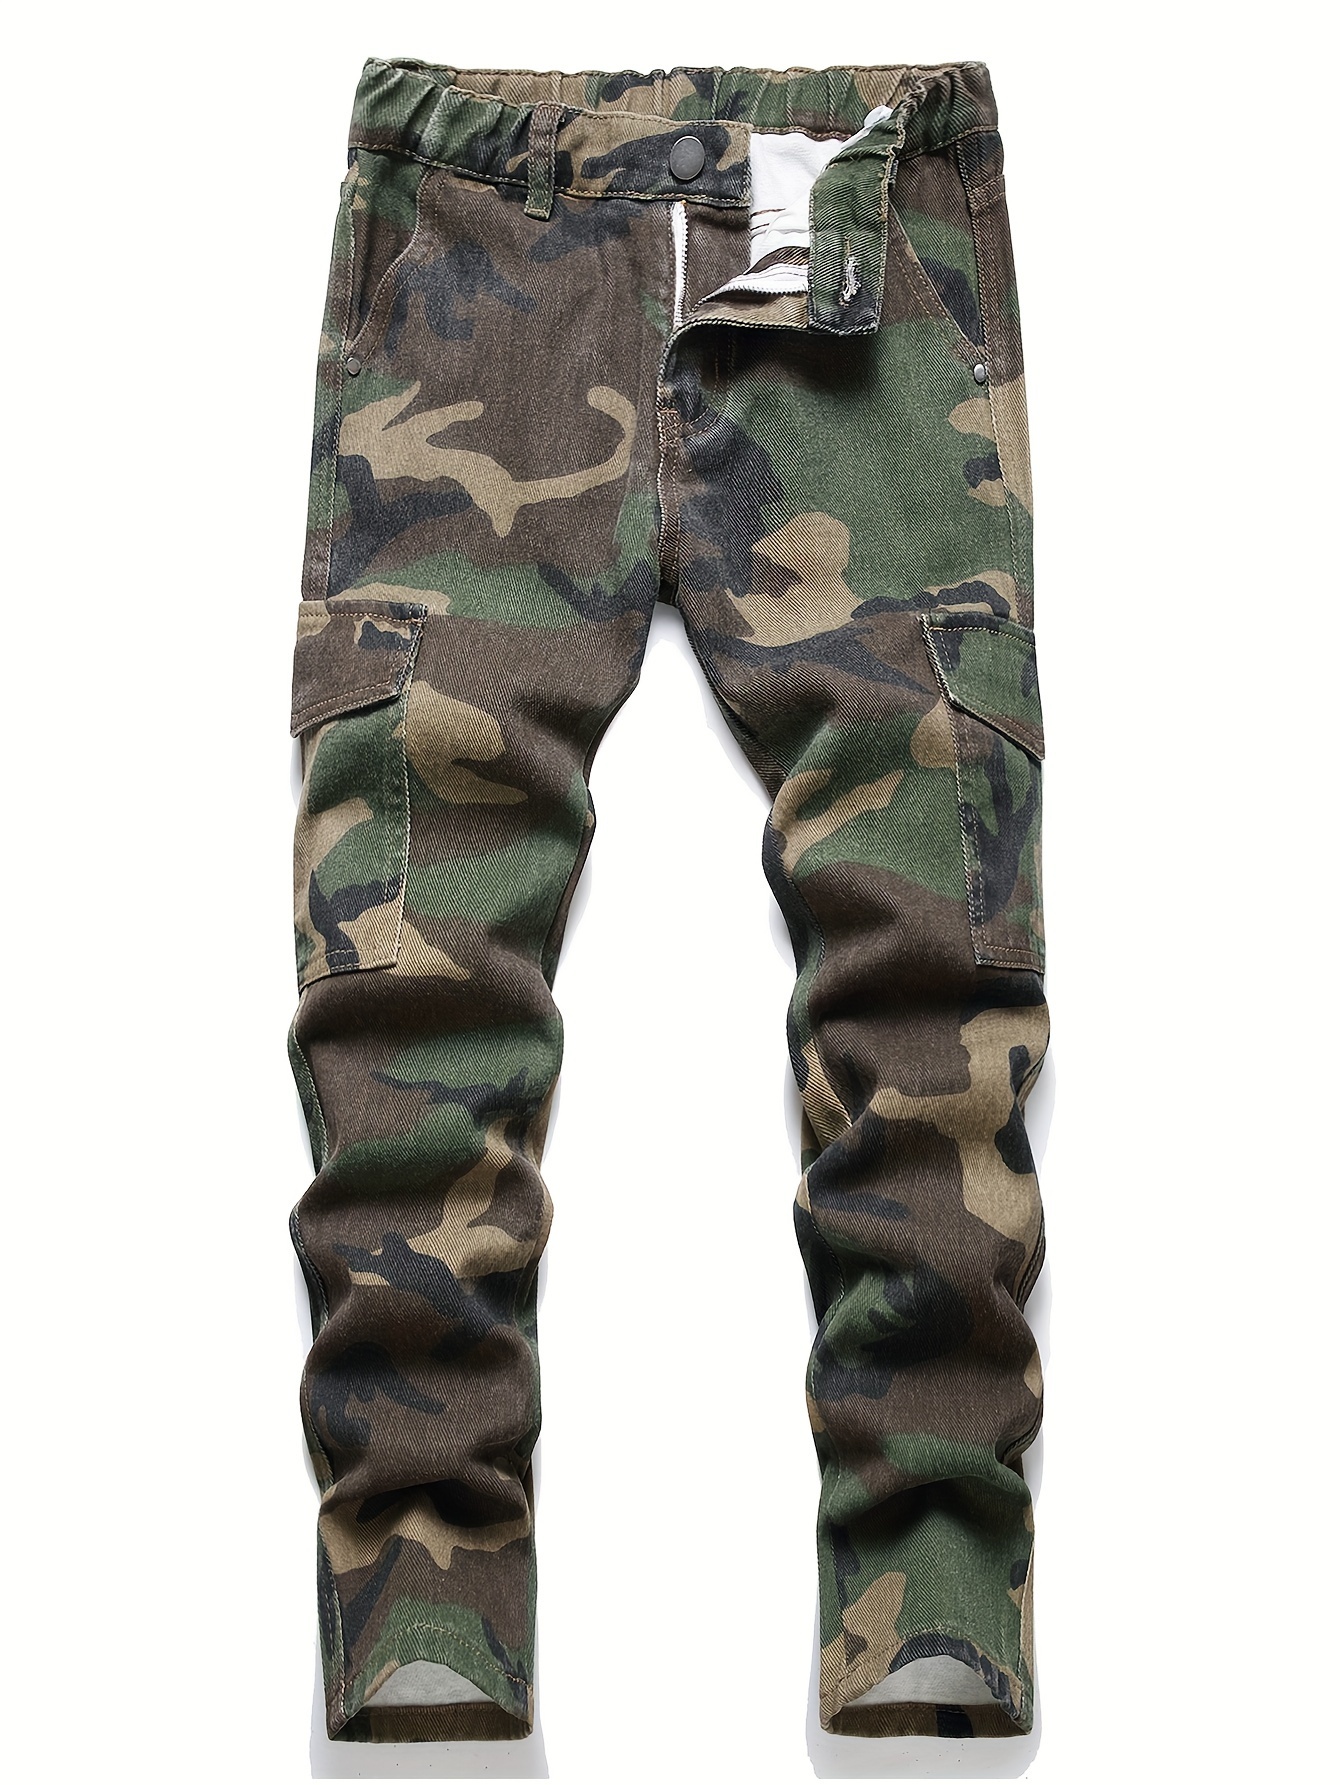 Kid's Camouflage Pattern Straight Jeans, Casual Denim Pants, Boy's Clothes For All Seasons